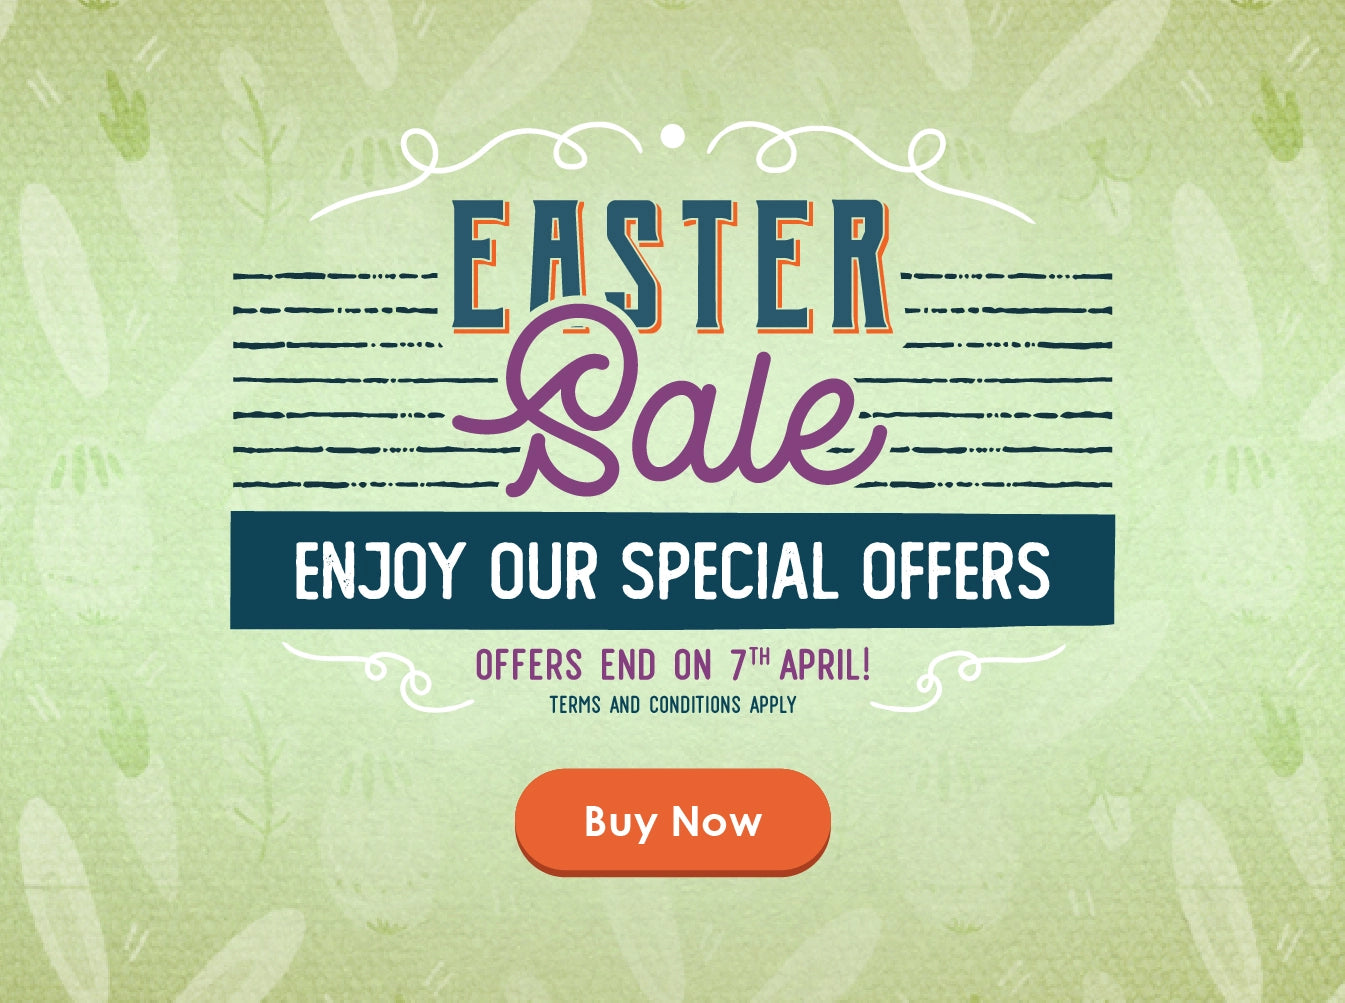 Easter Sale, Sale, Offers, BBQ, Discounts 